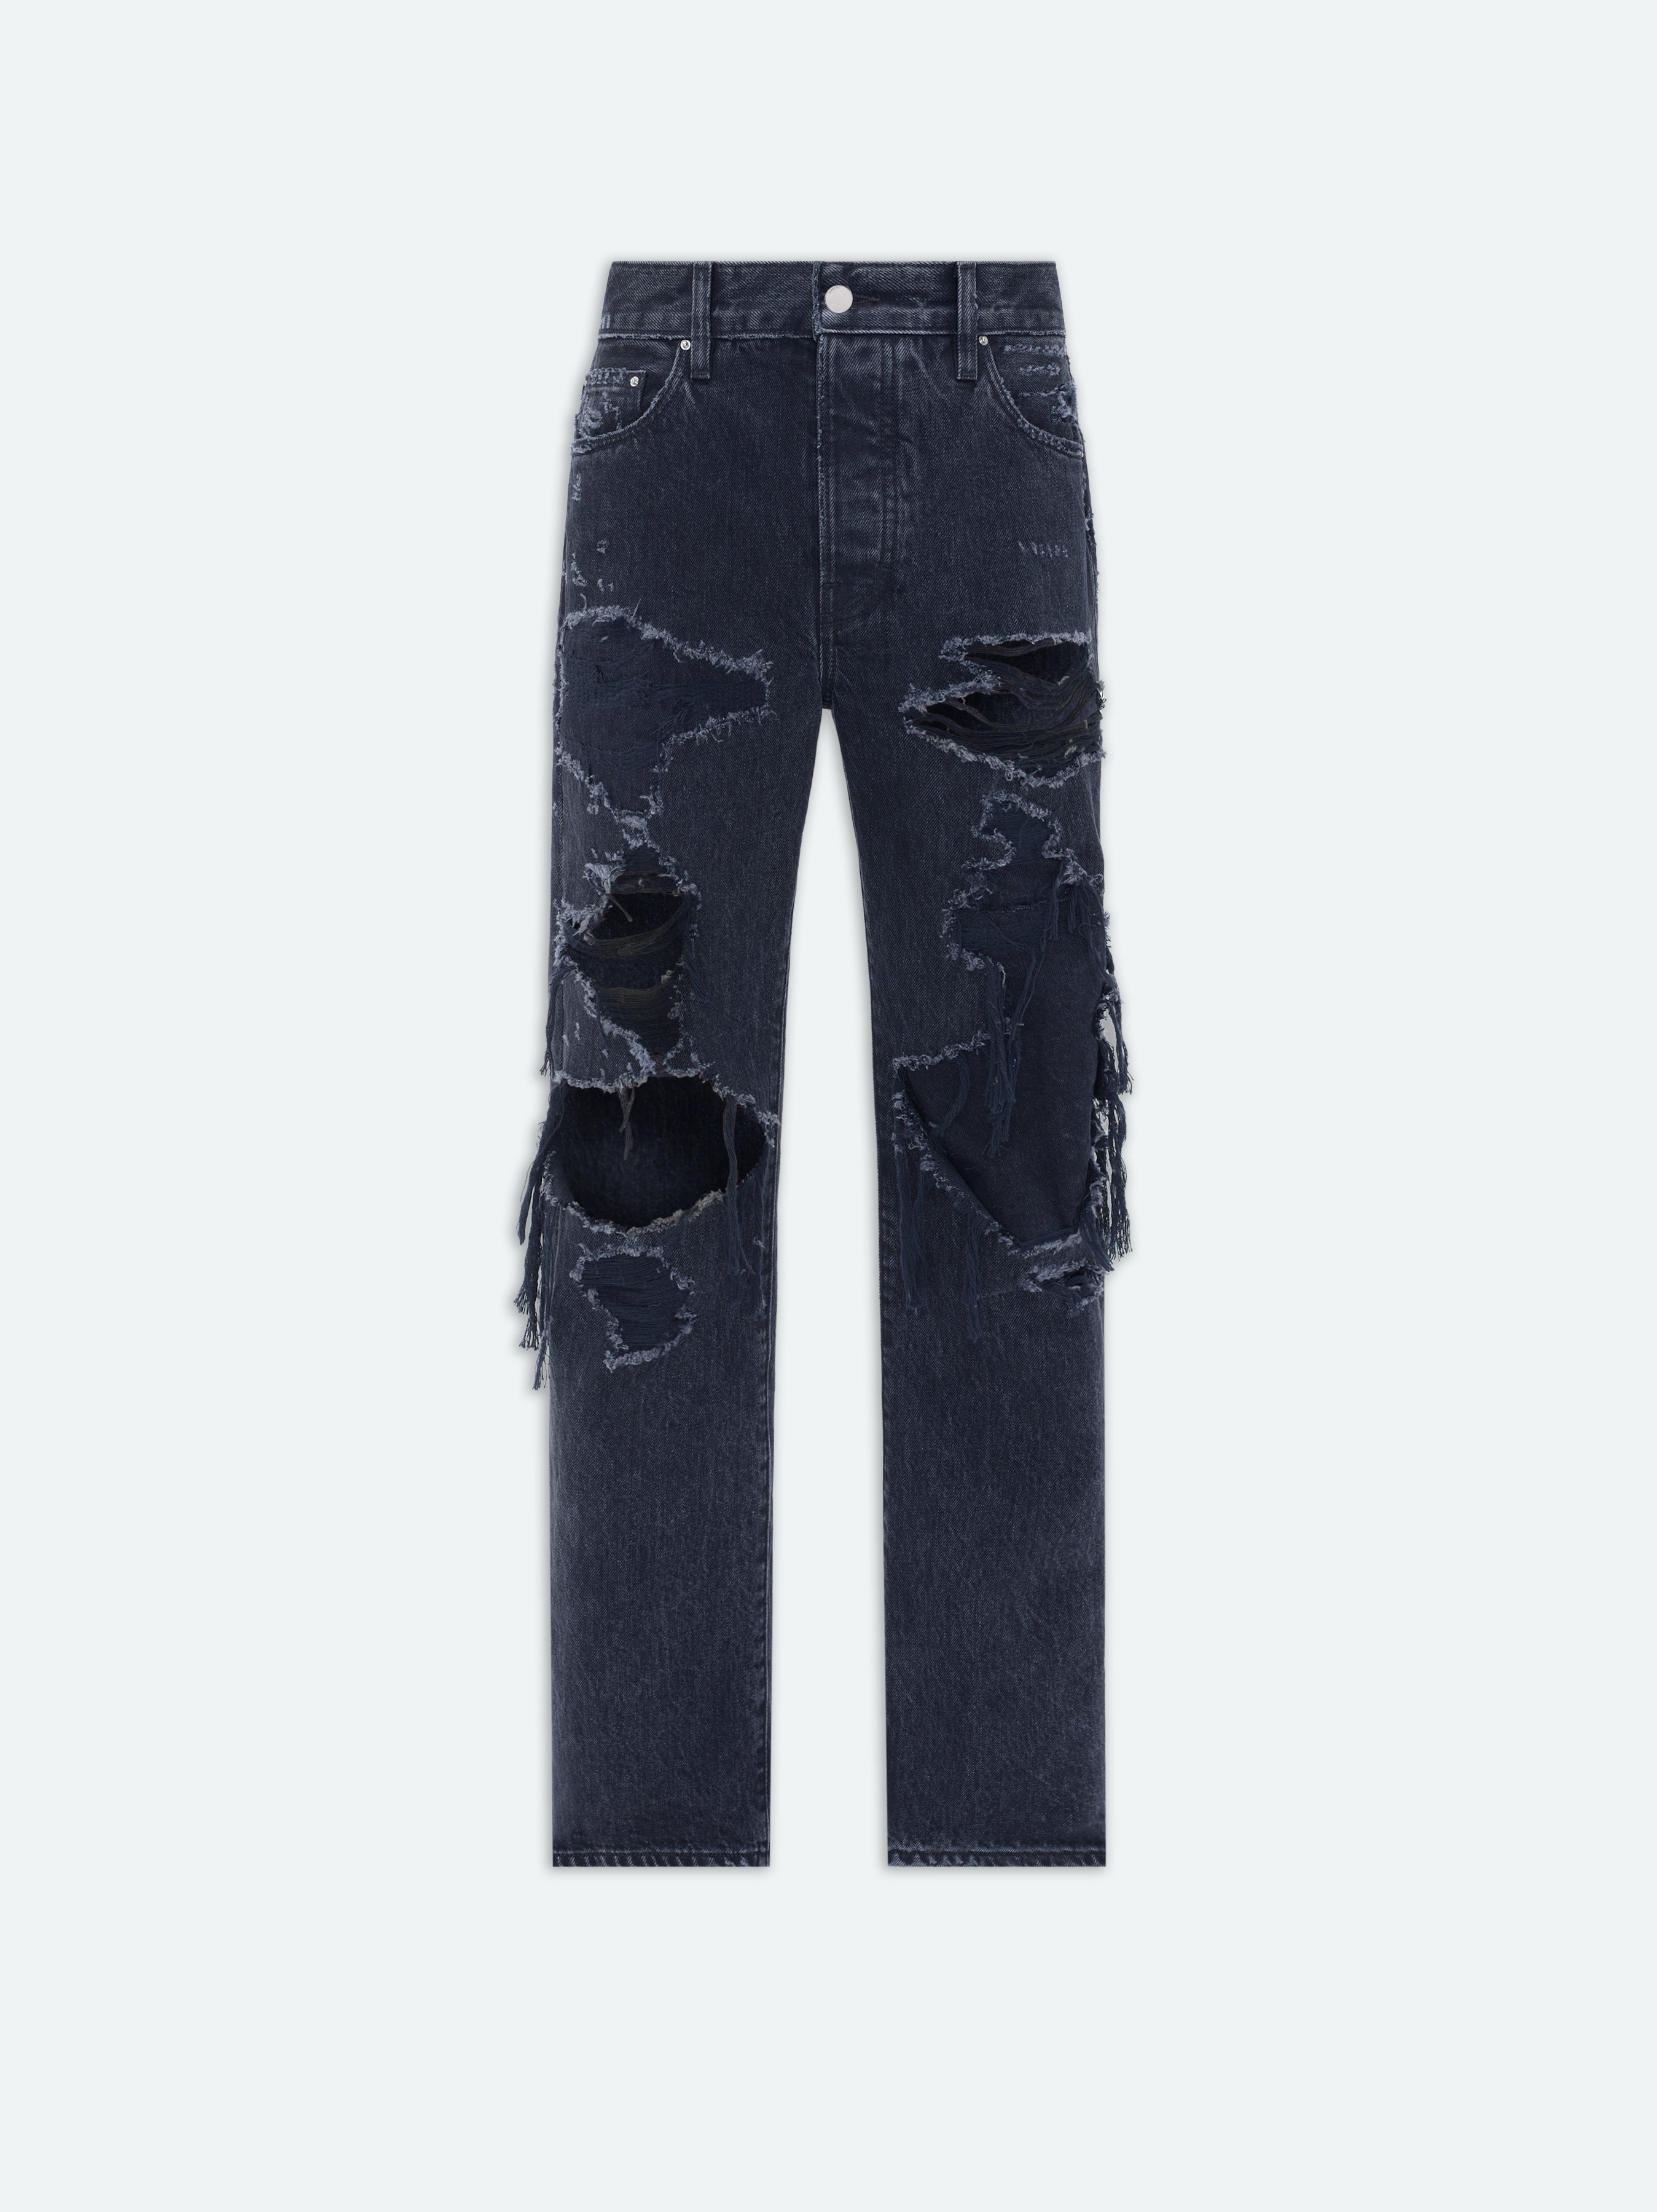 Product WOMEN - DISTRESSED STRAIGHT - Faded Black featured image